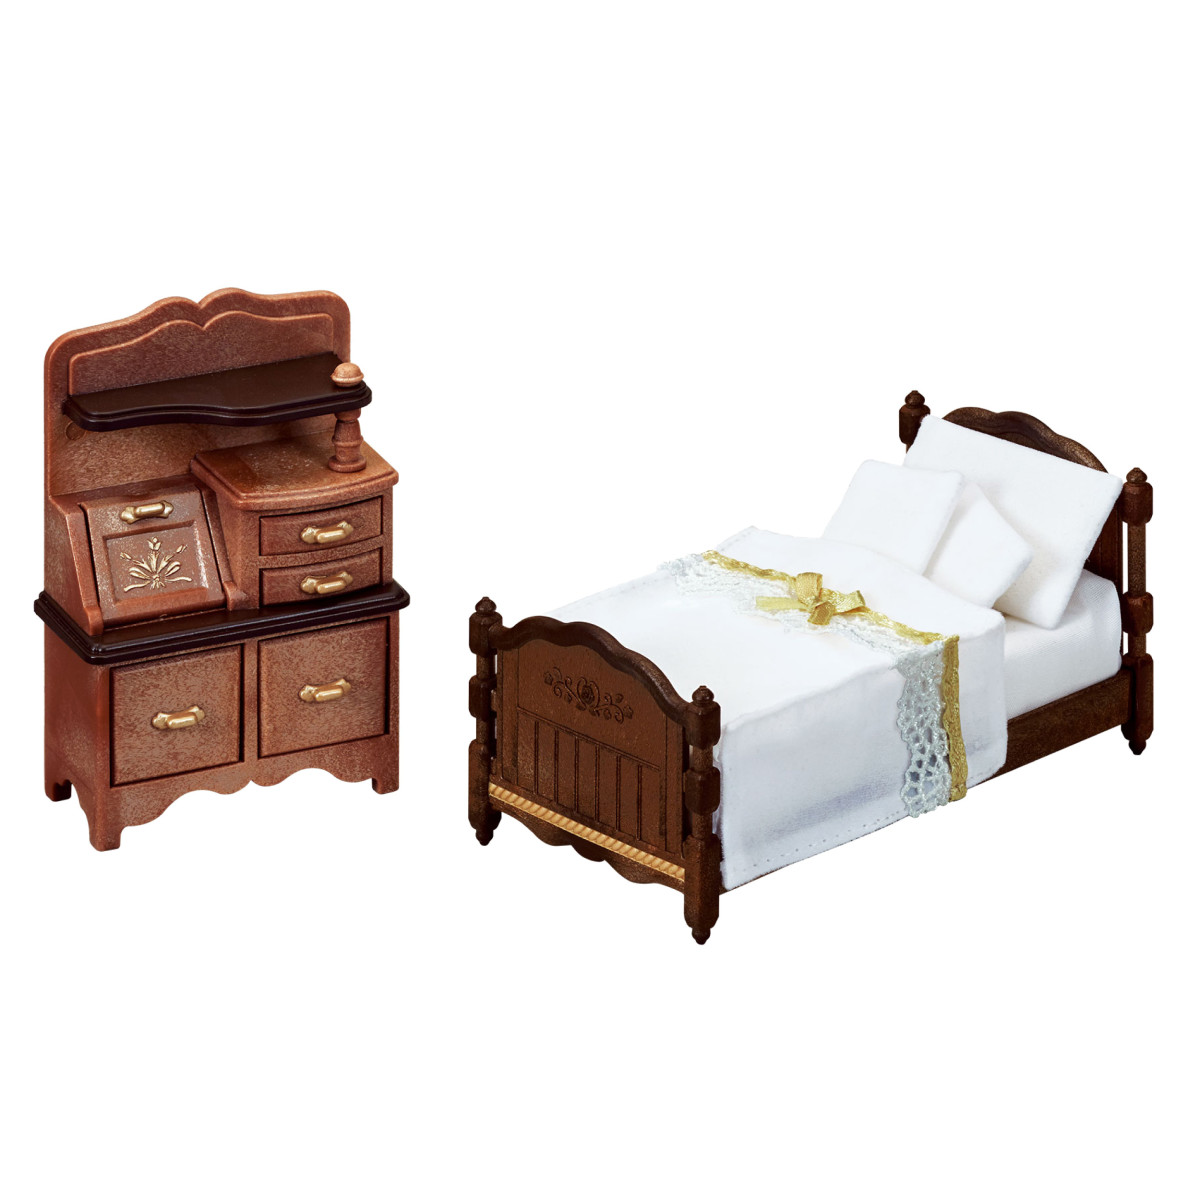 Classic Brown Bed Chest Set - Calico Critter Online Shop